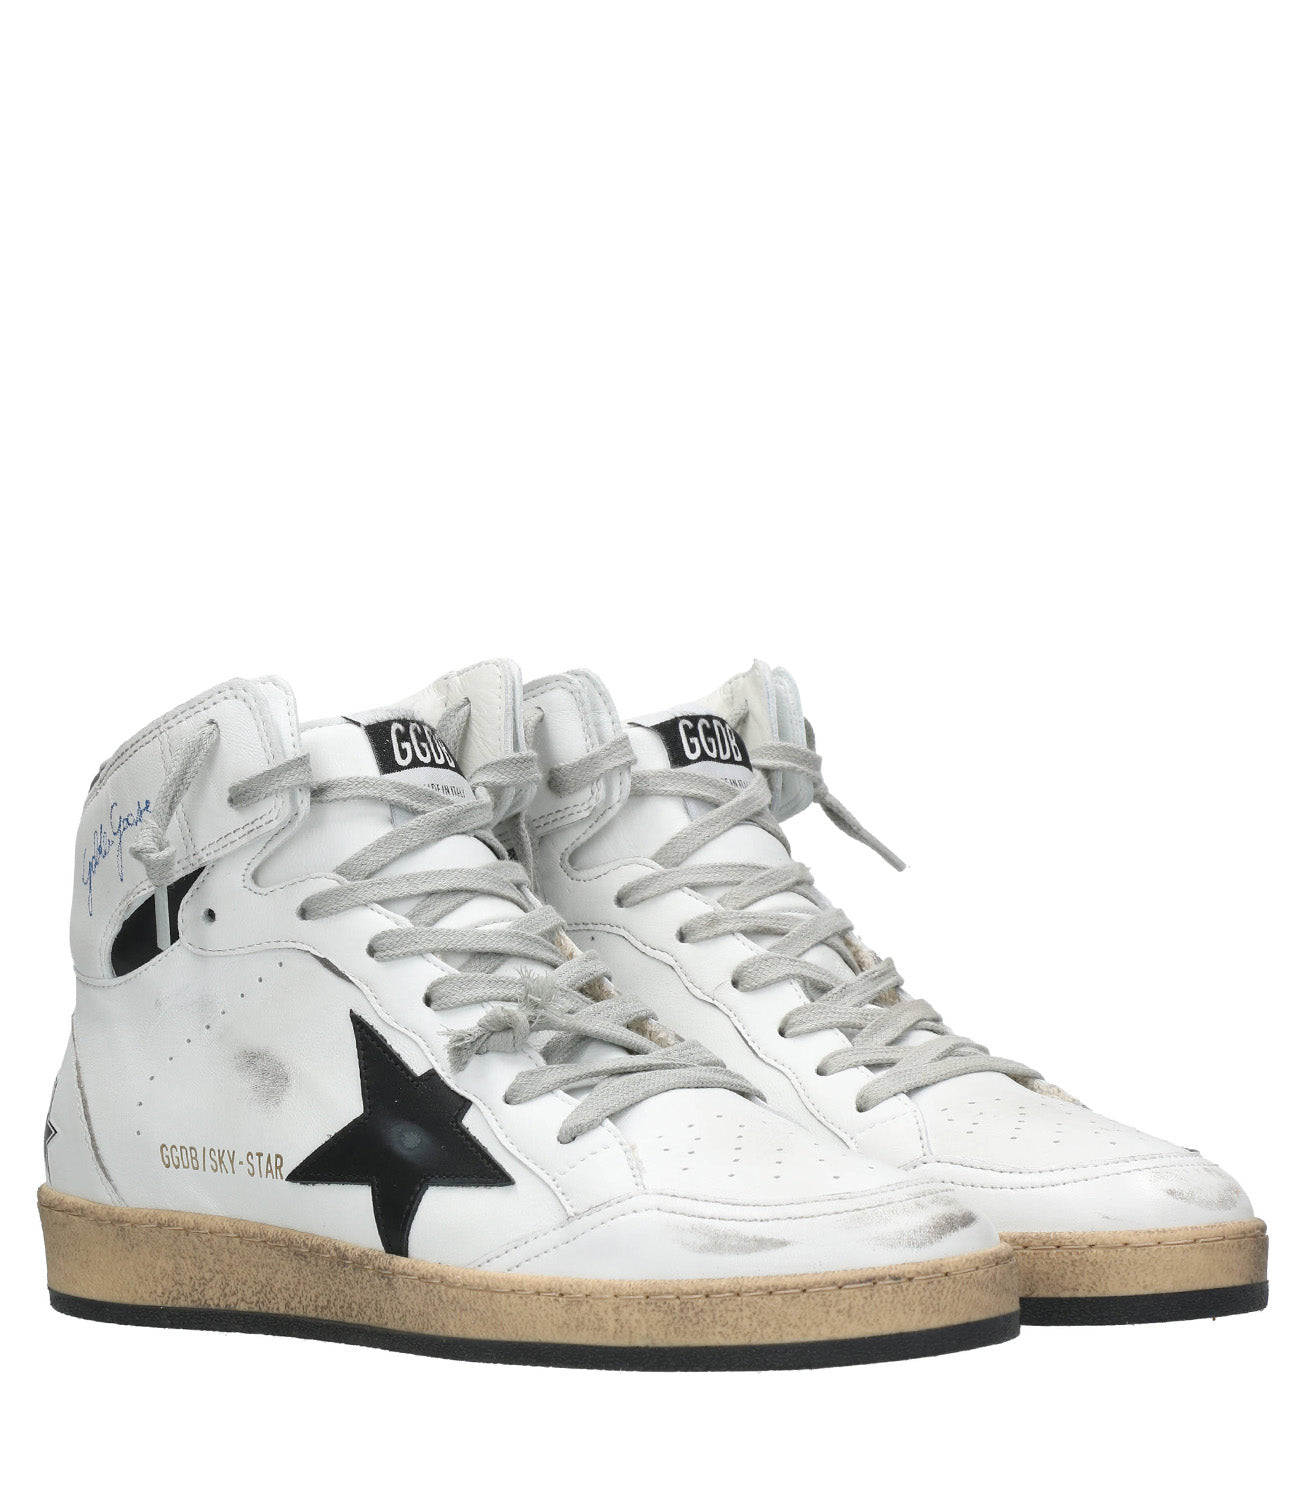 Golden Goose | Sky Star Sneakers White and Black